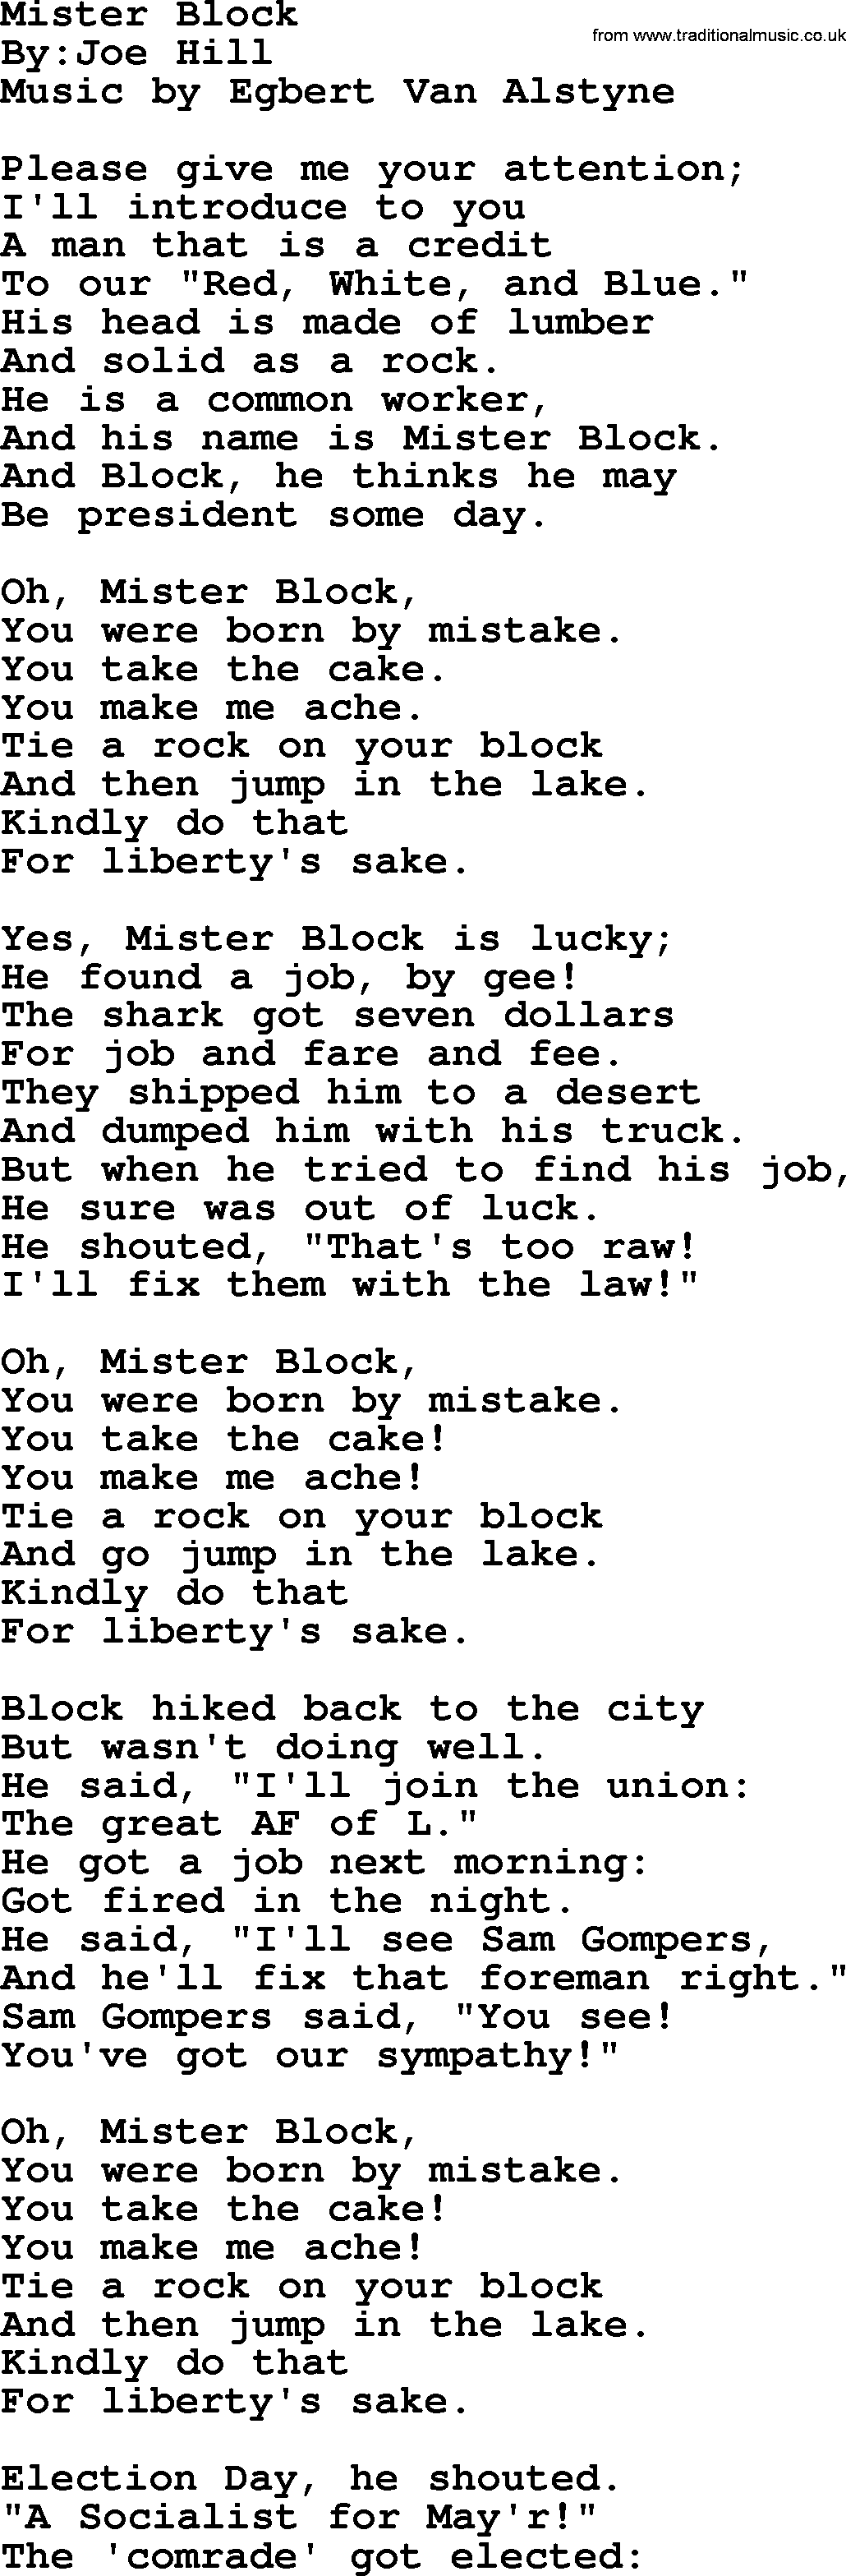 Political, Solidarity, Workers or Union song: Mister Block, lyrics